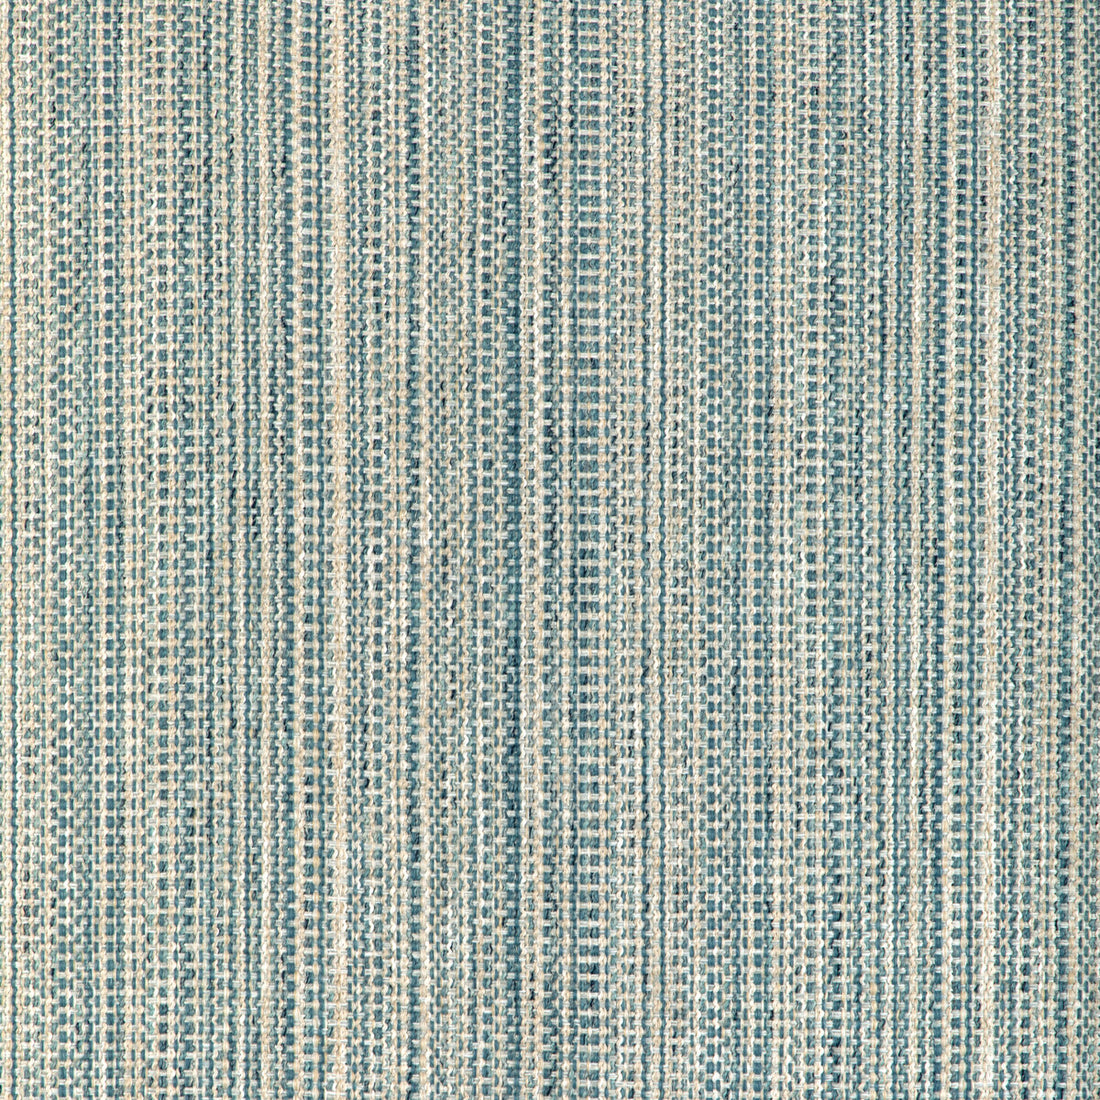 Kravet Smart fabric in 37018-1635 color - pattern 37018.1635.0 - by Kravet Smart in the Gis collection